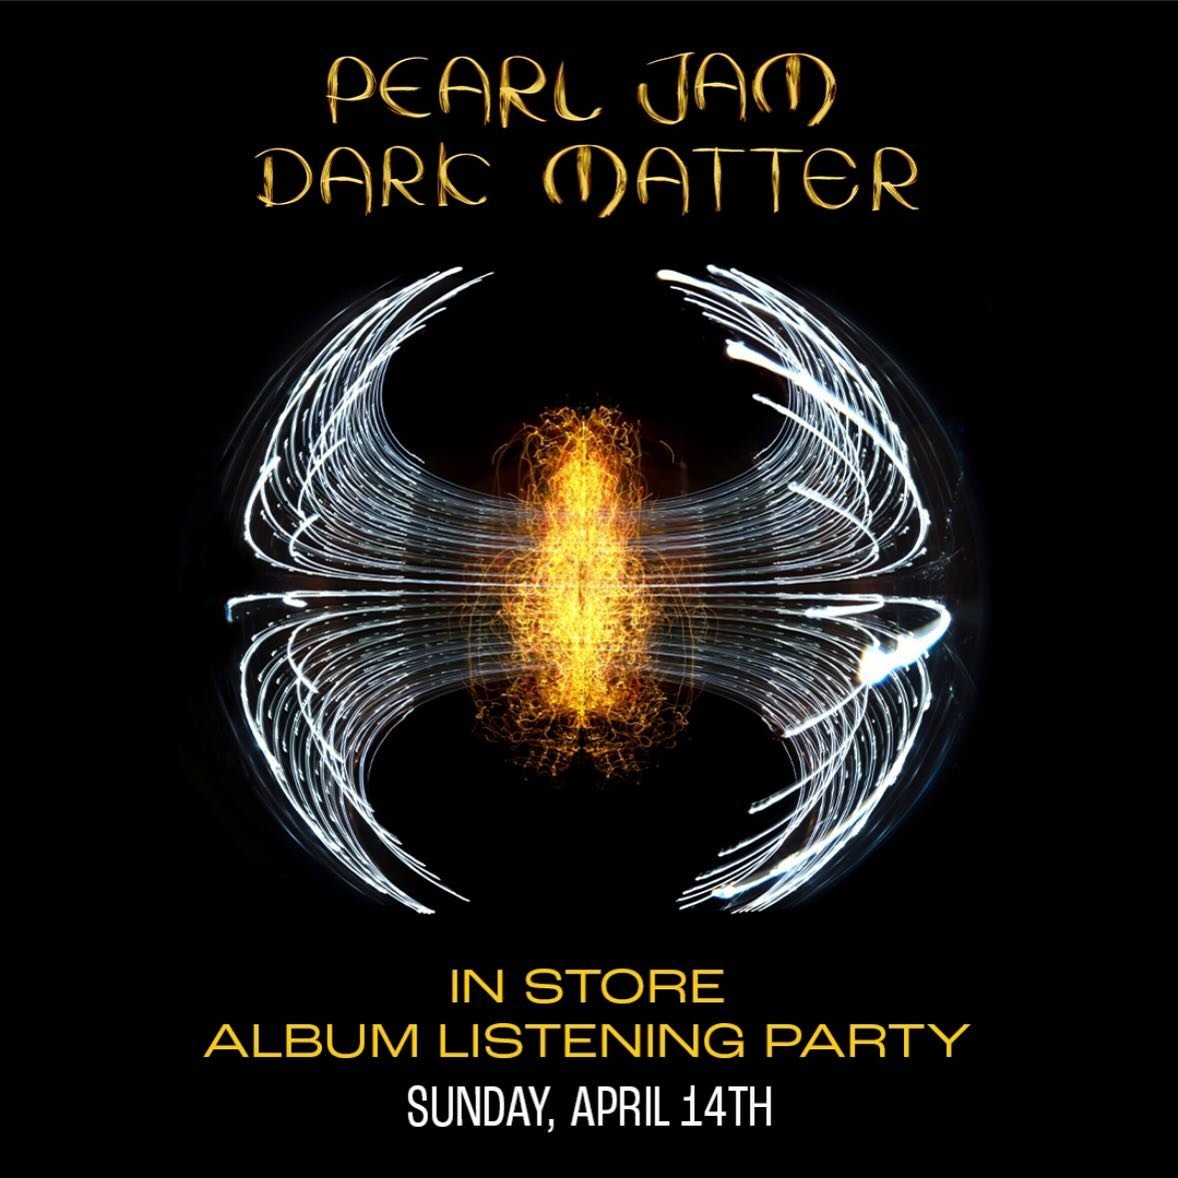 The rumors are true, we&rsquo;re having a listening party for the new Pearl Jam album ᴅᴀʀᴋ ᴍᴀᴛᴛᴇʀ this Sunday 4/14 at 3 PM! We&rsquo;ll have lots of Pearl Jam related goodies for you to take home (while supplies last) and we&rsquo;ll also be taking p